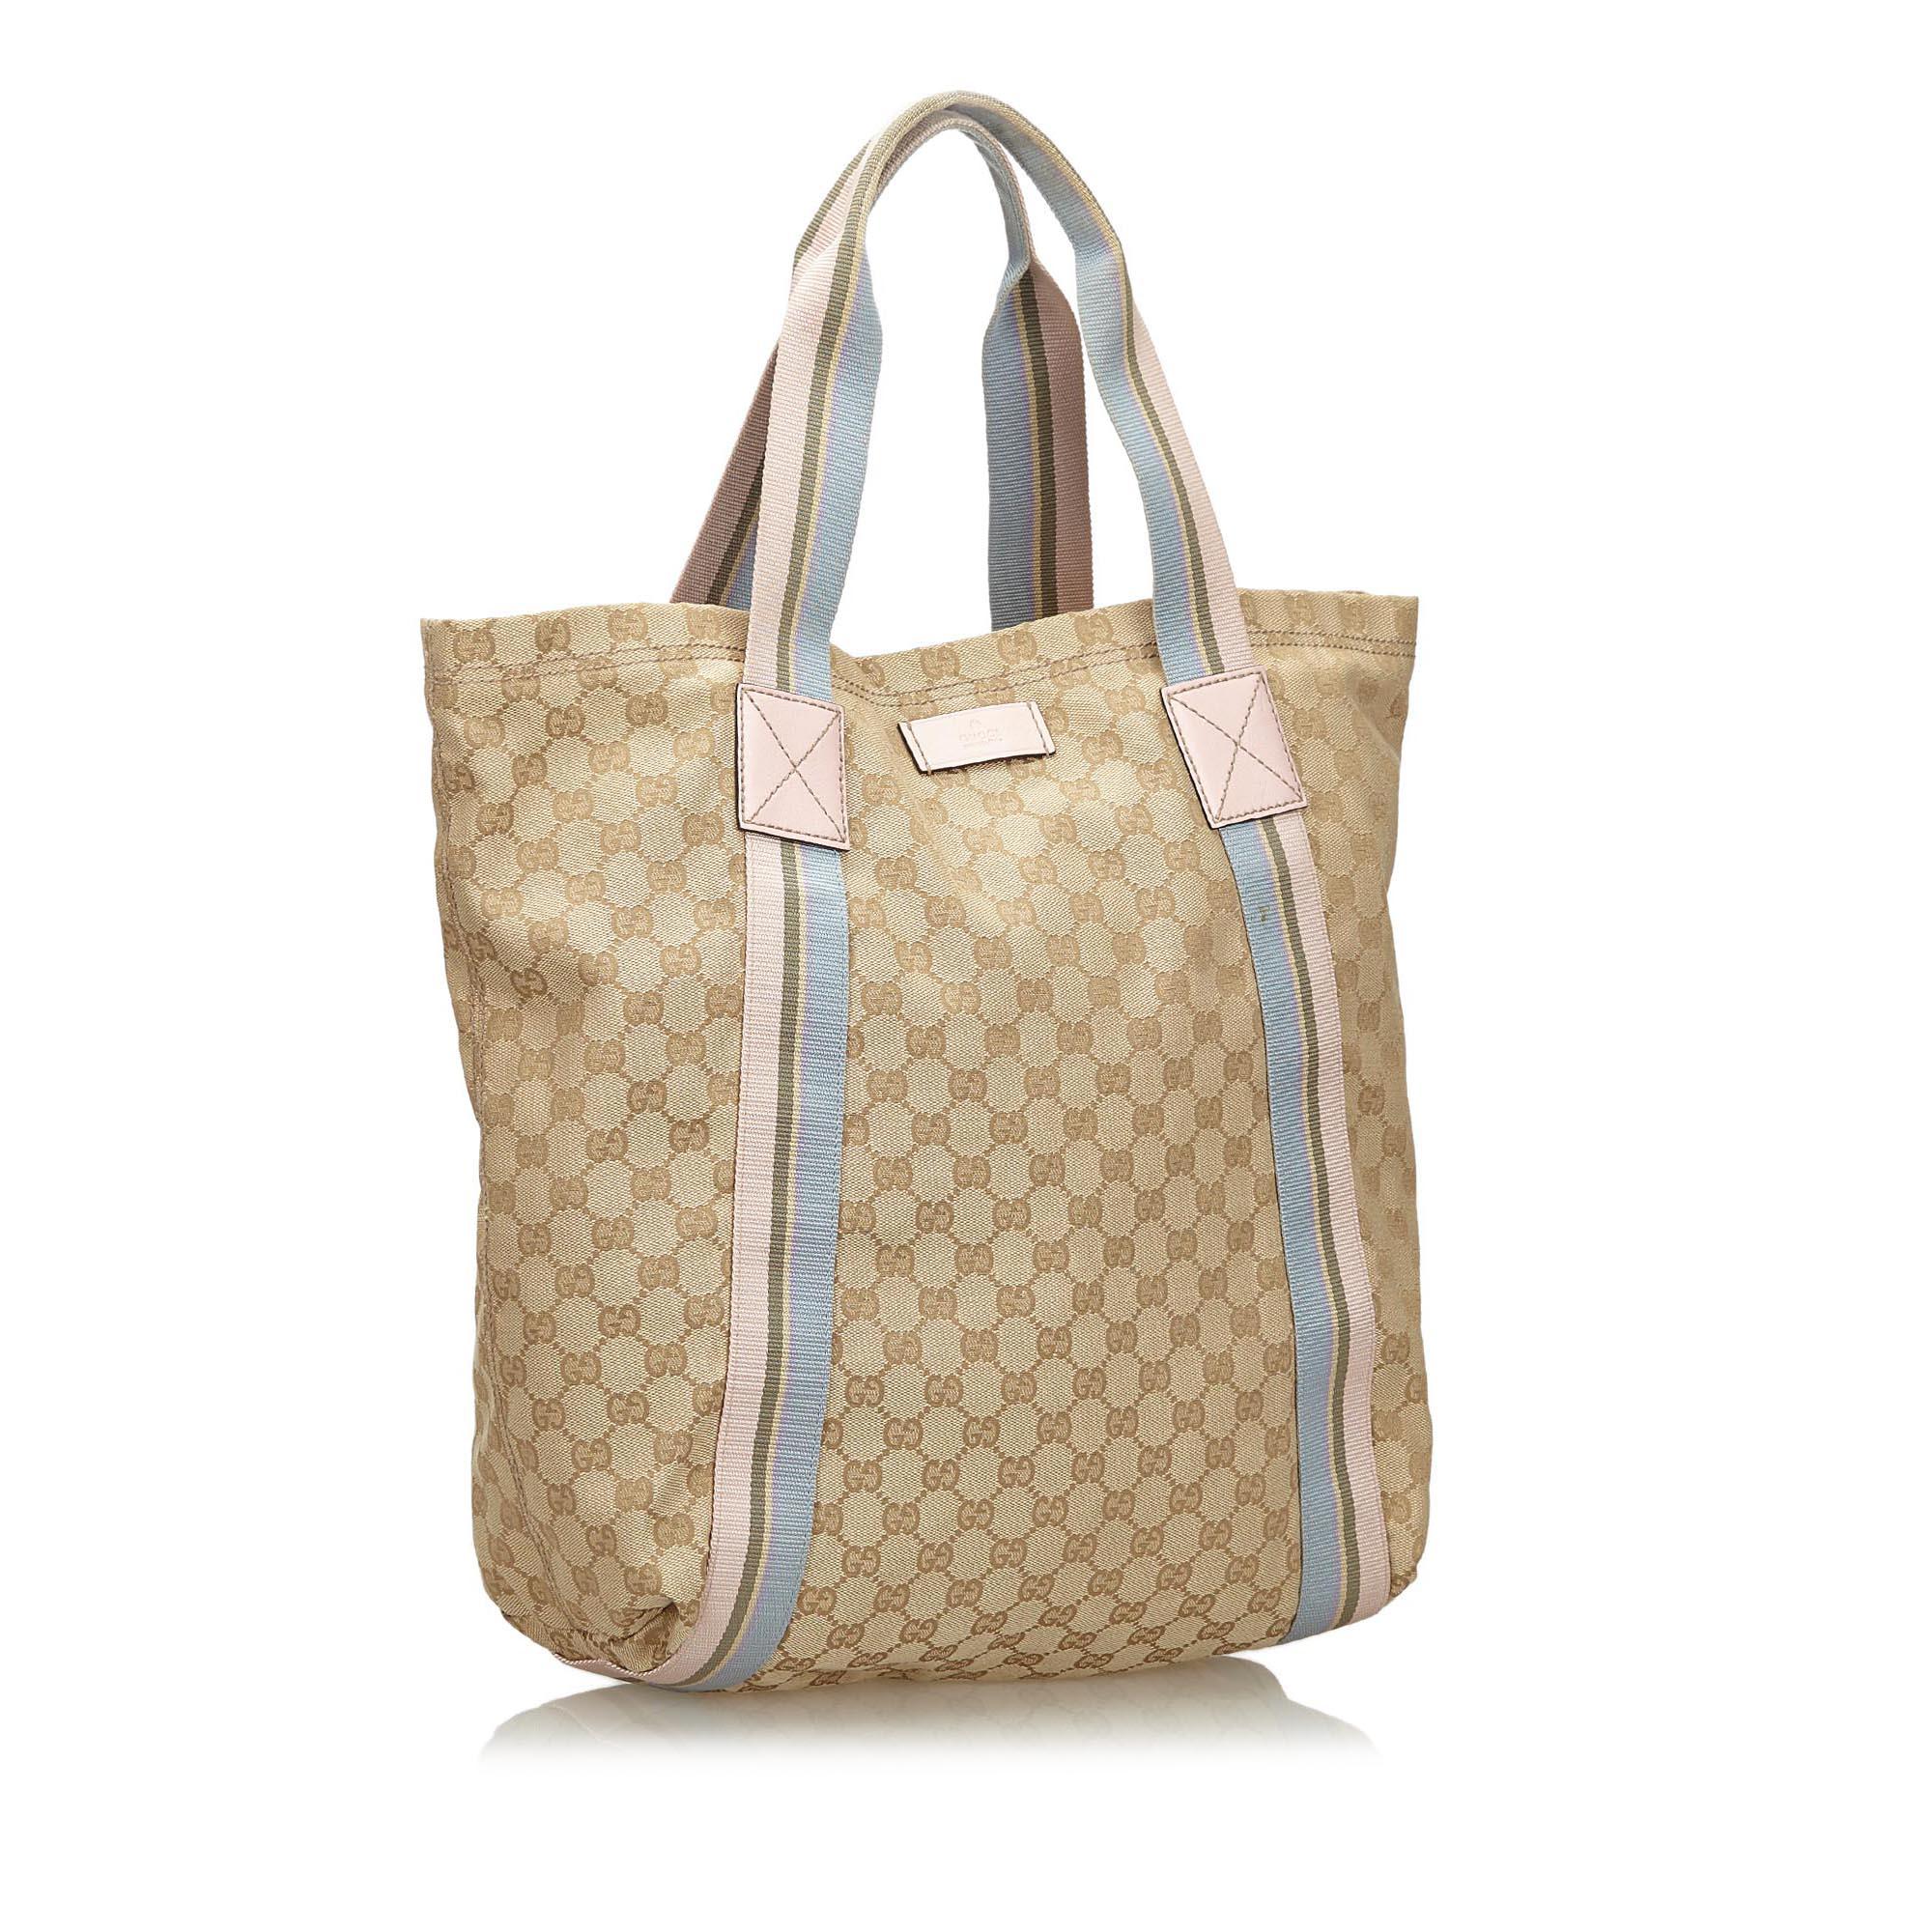 This tote bag features a jacquard body, flat straps, open top, and an interior open pocket. It carries as B+ condition rating.

Inclusions: 
This item does not come with inclusions.

Dimensions:
Length: 36.00 cm
Width: 30.50 cm
Depth: 12.00